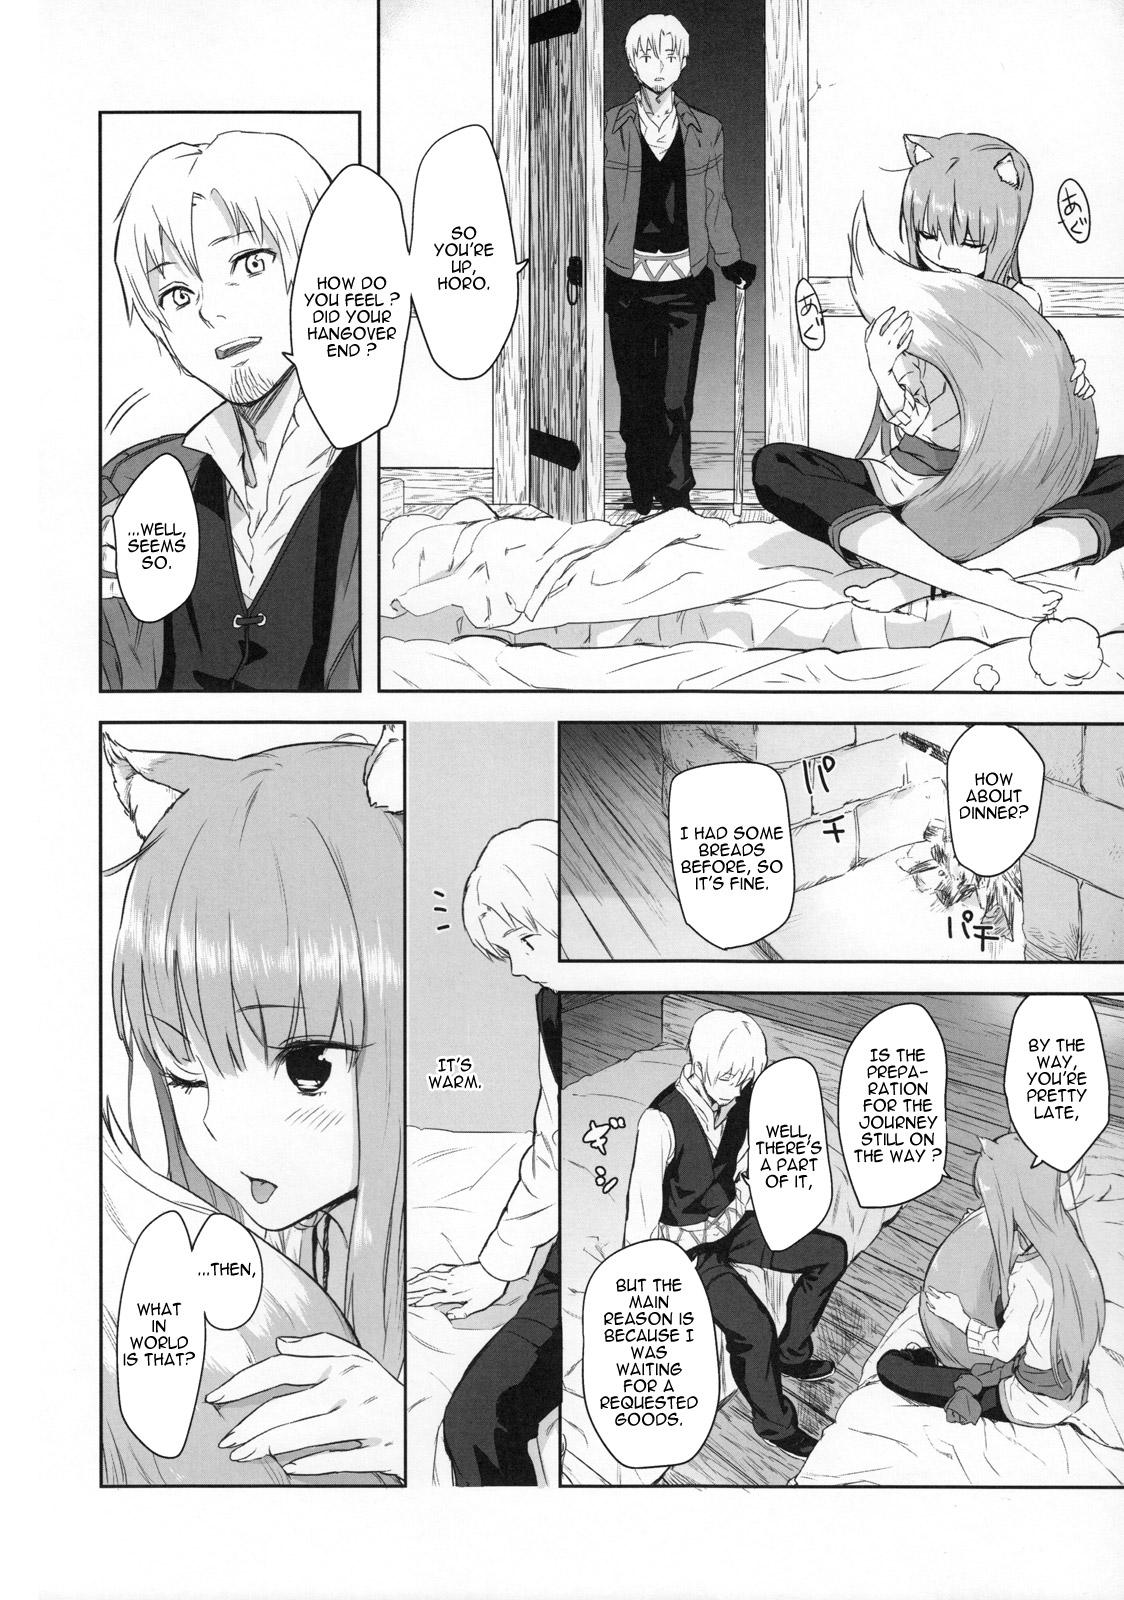 Dom Harvest II - Spice and wolf Teen - Page 12